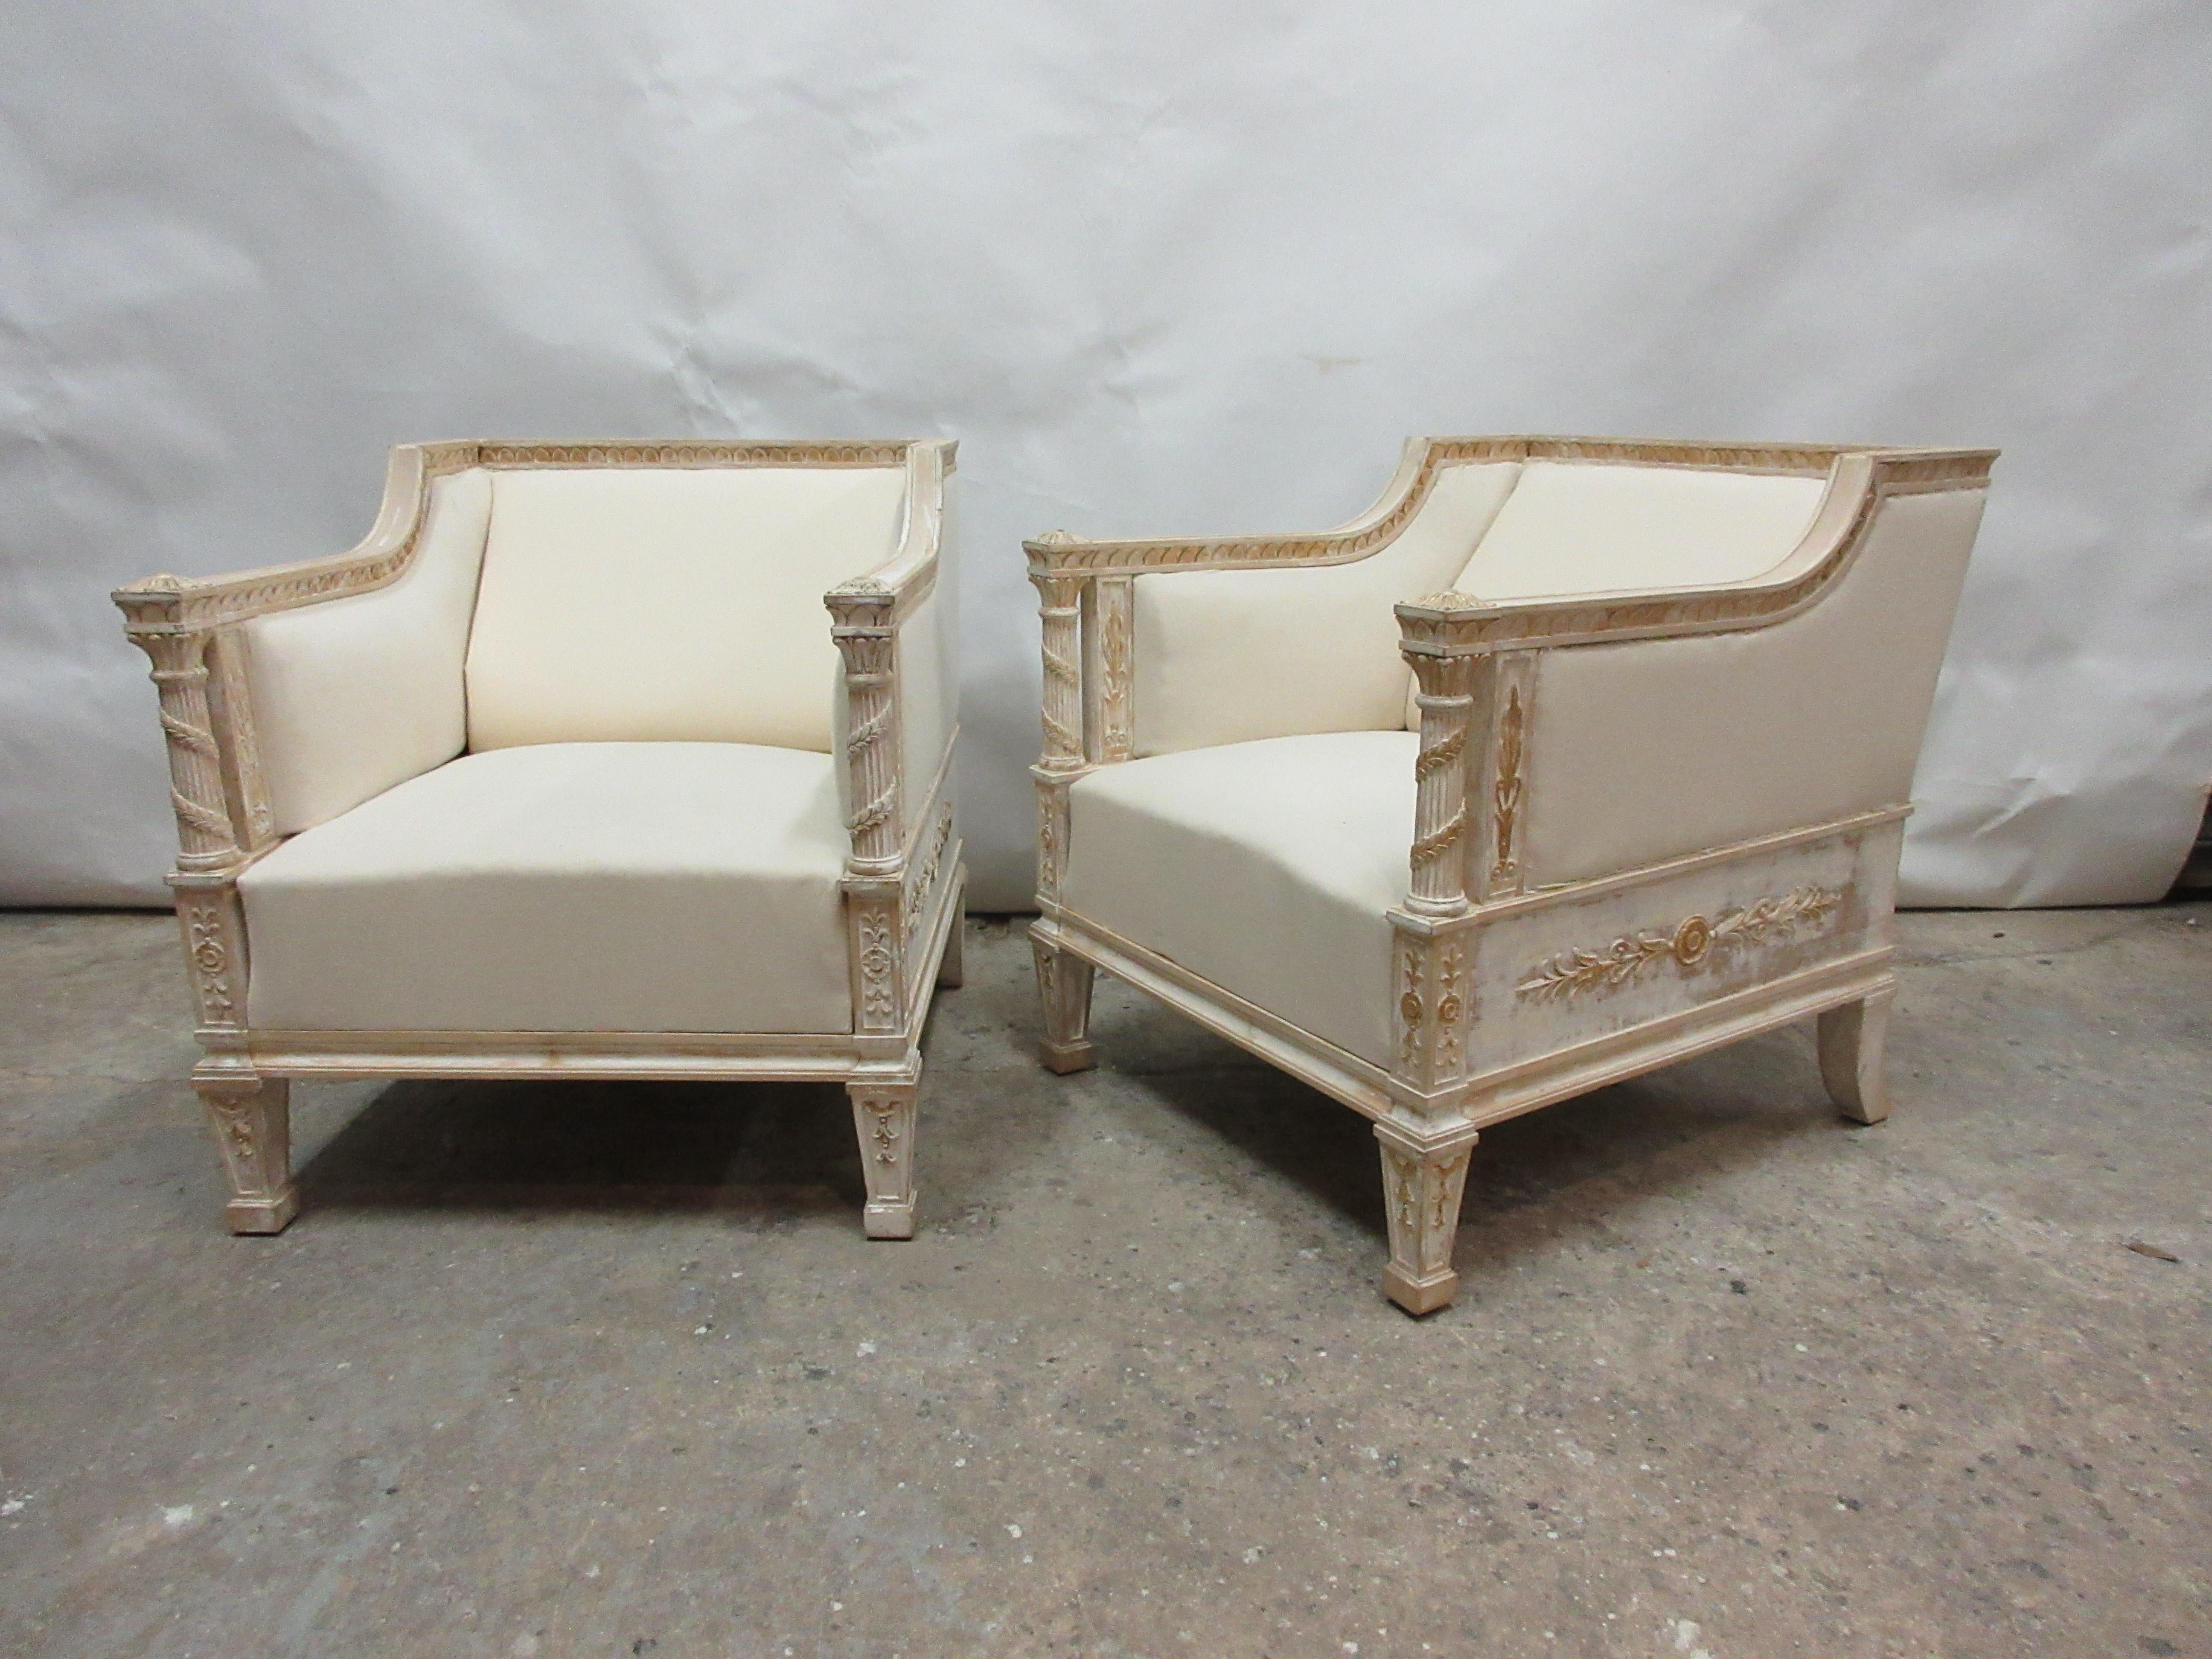 This is a set of 2 100% original Painted Gustavian bergère chairs. Seating restored and recovered in Muslin.